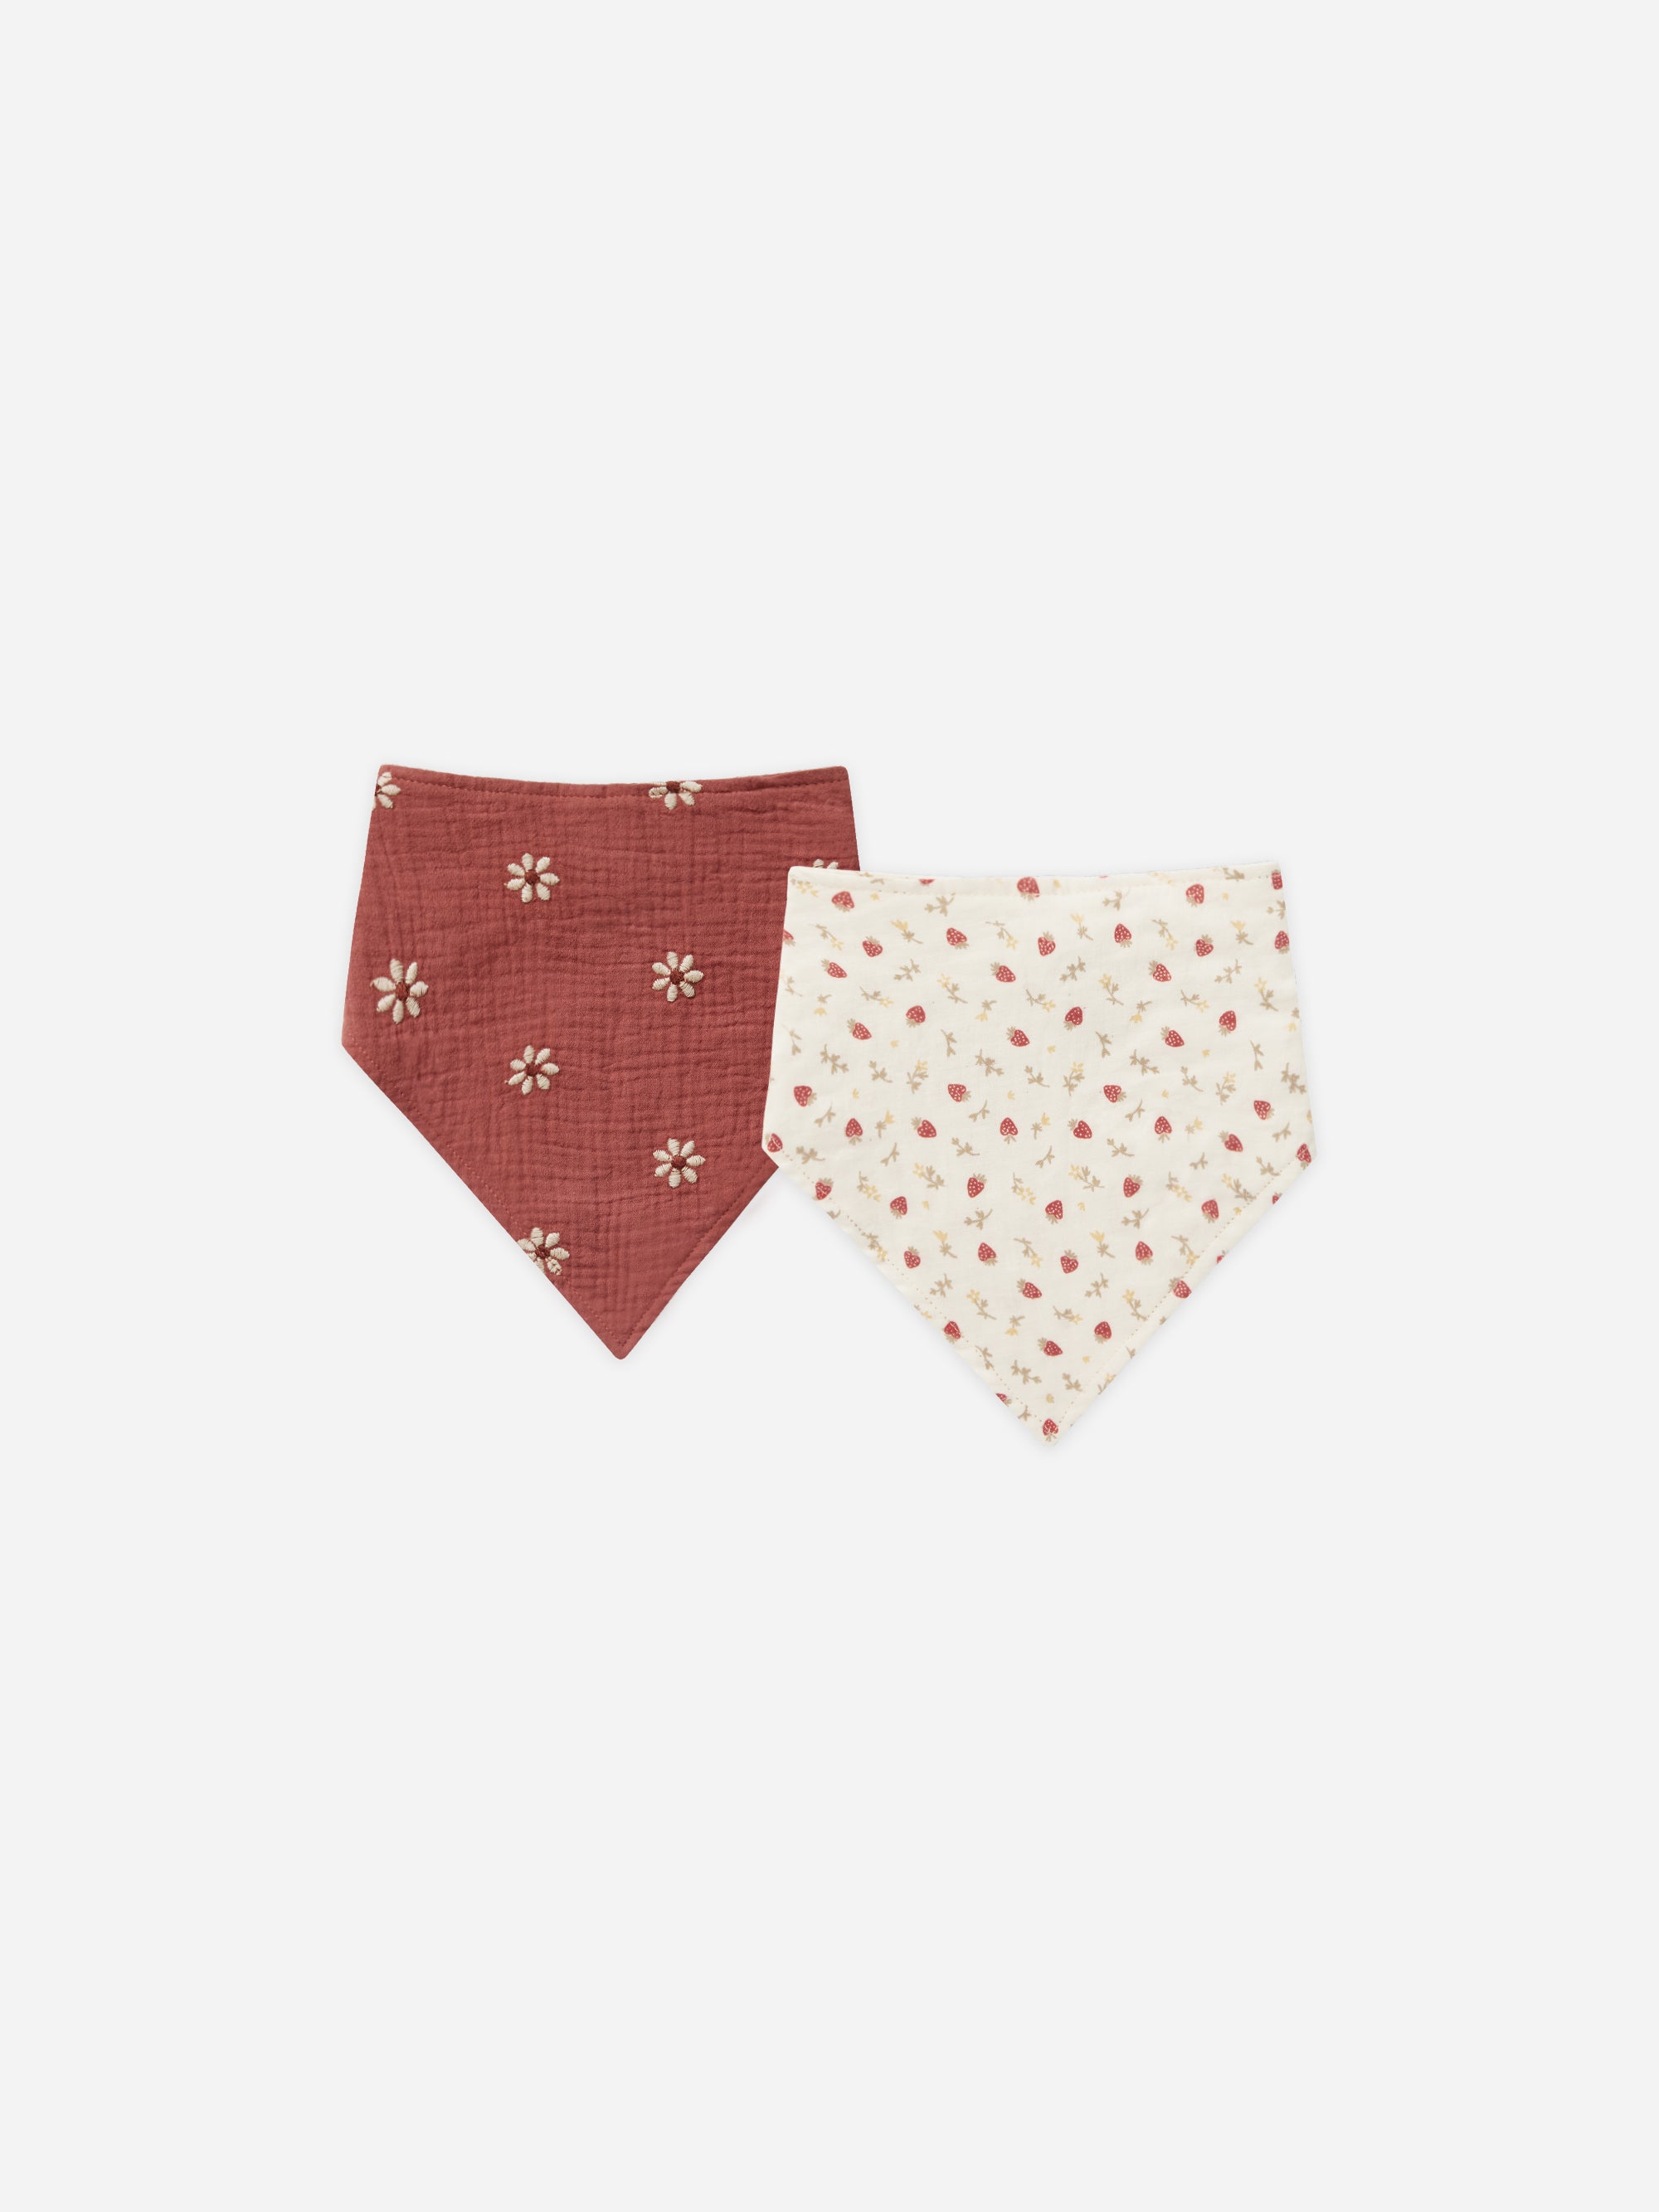 Scarf Bib || Strawberry Fields, Embroidered Daisy - Rylee + Cru | Kids Clothes | Trendy Baby Clothes | Modern Infant Outfits |